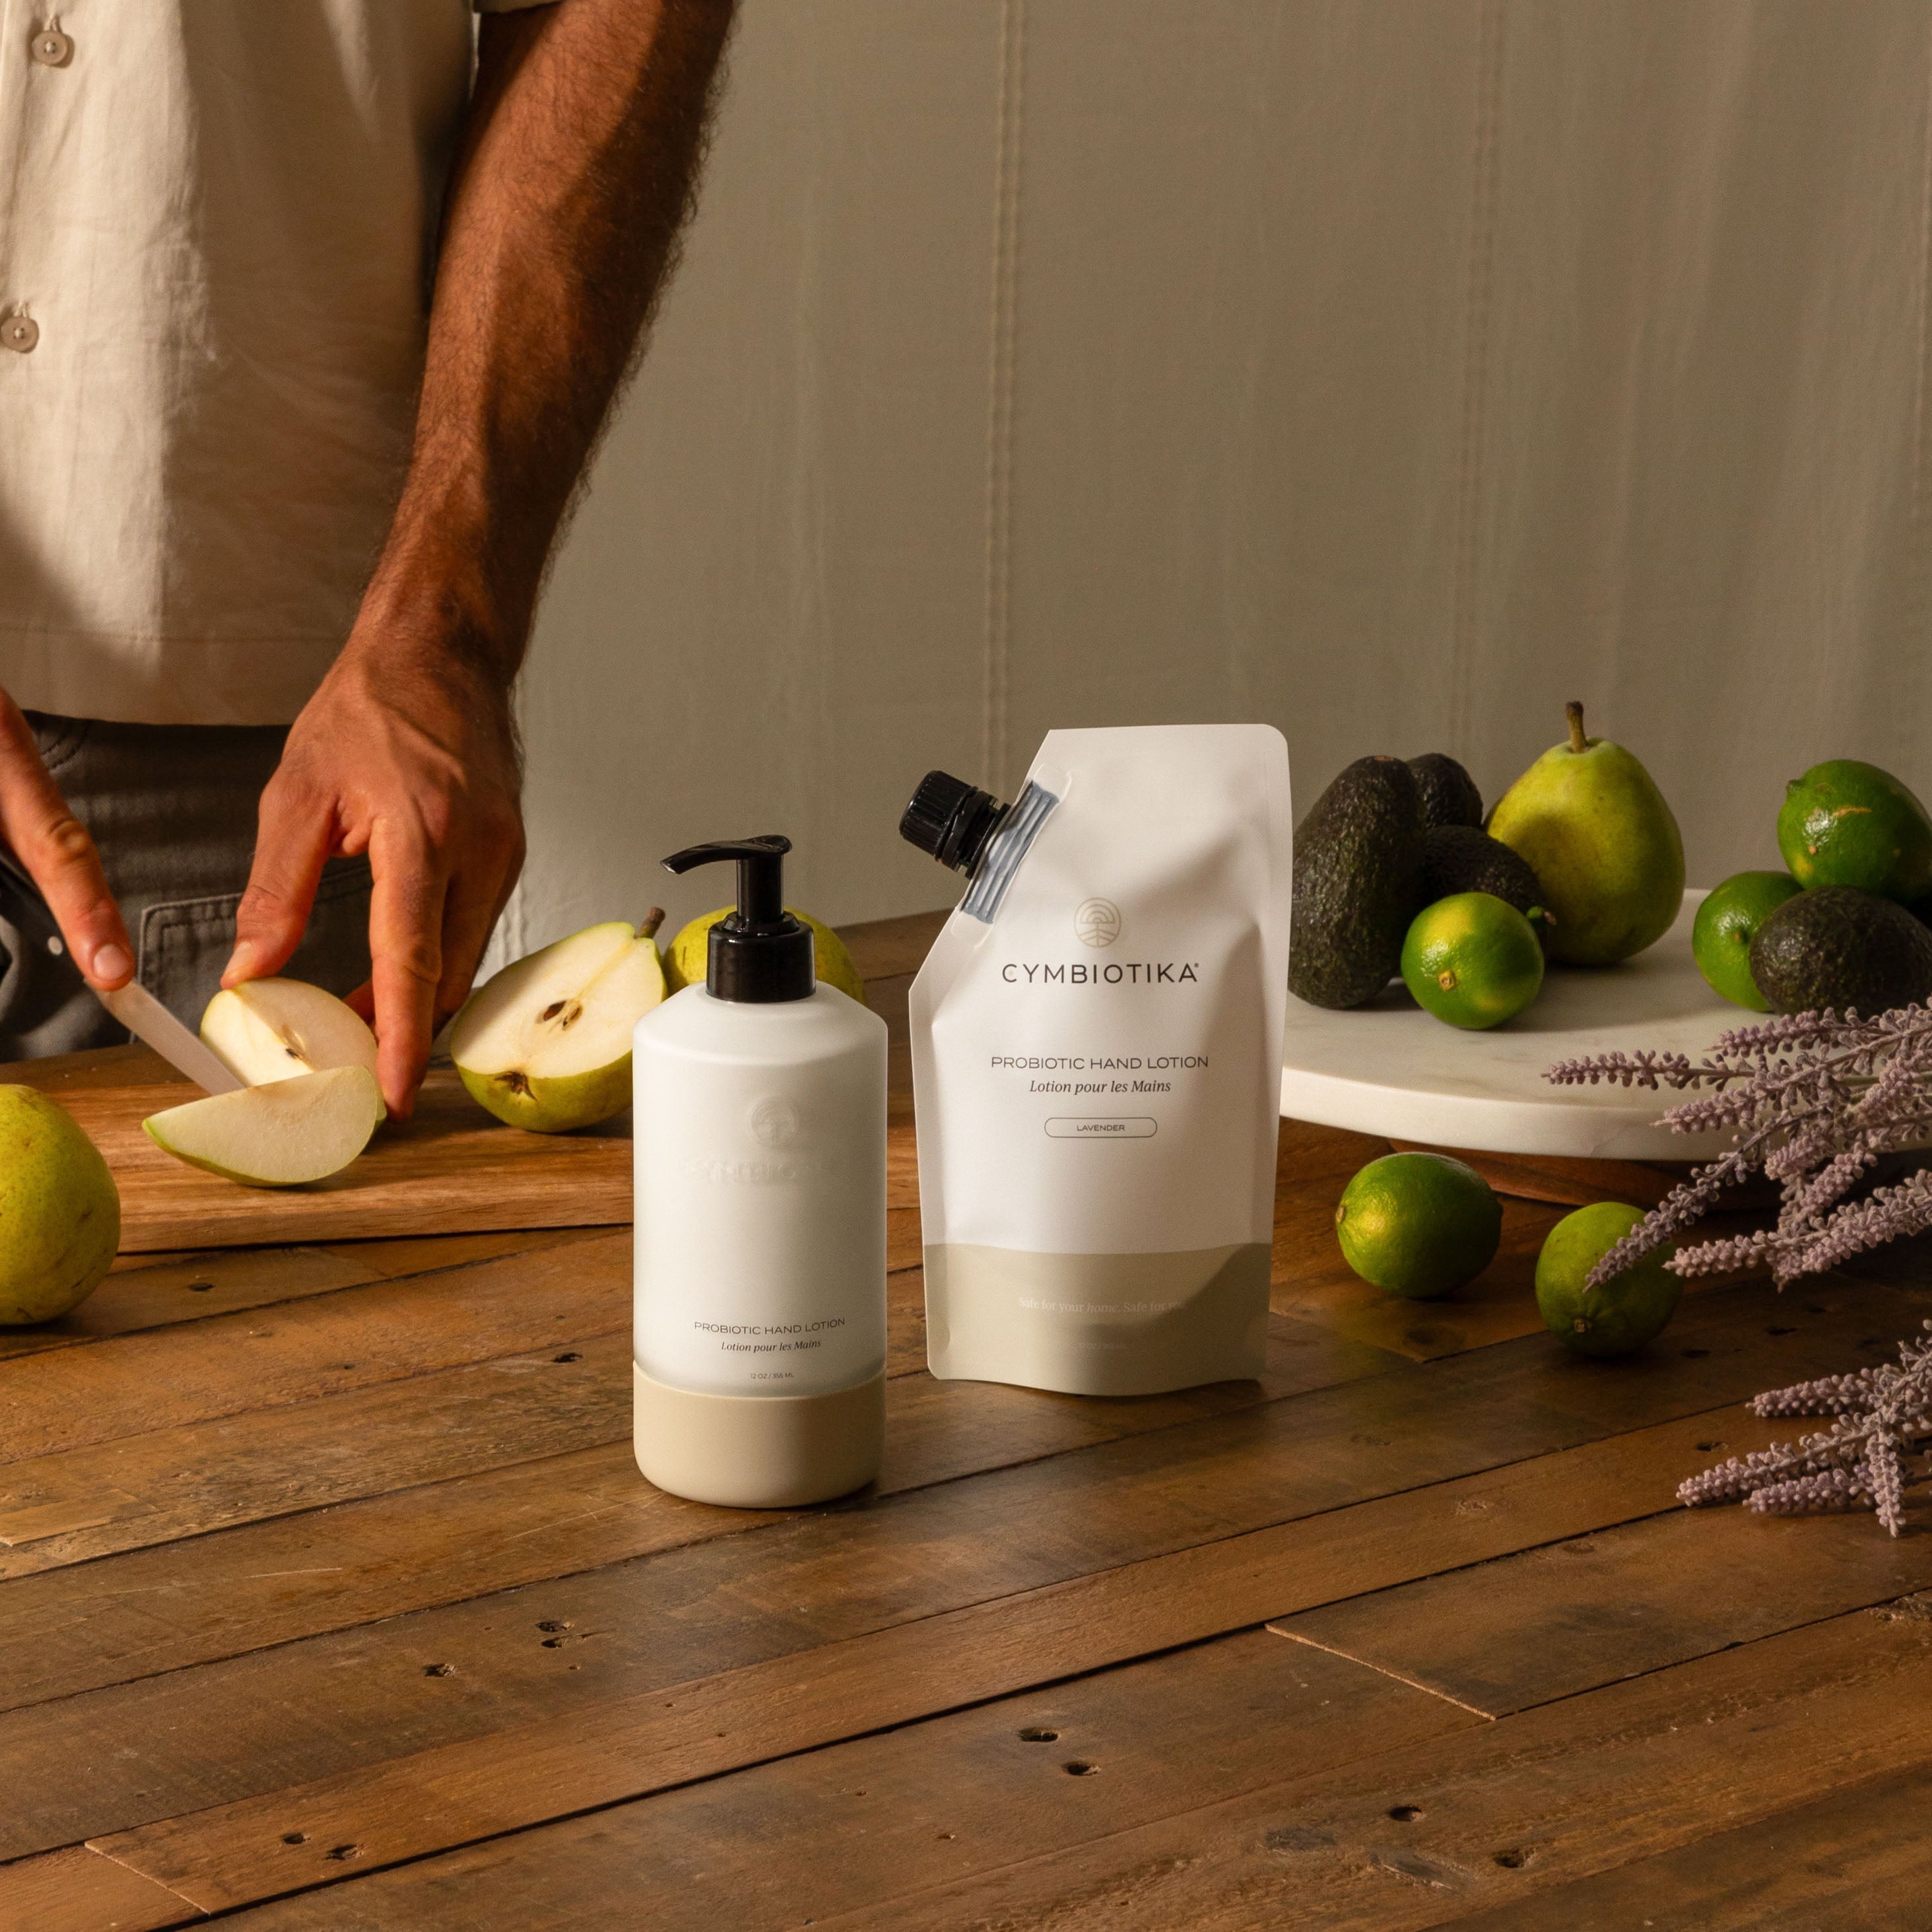 Probiotic Hand Lotion Kit on Counter next to Pear being Cut